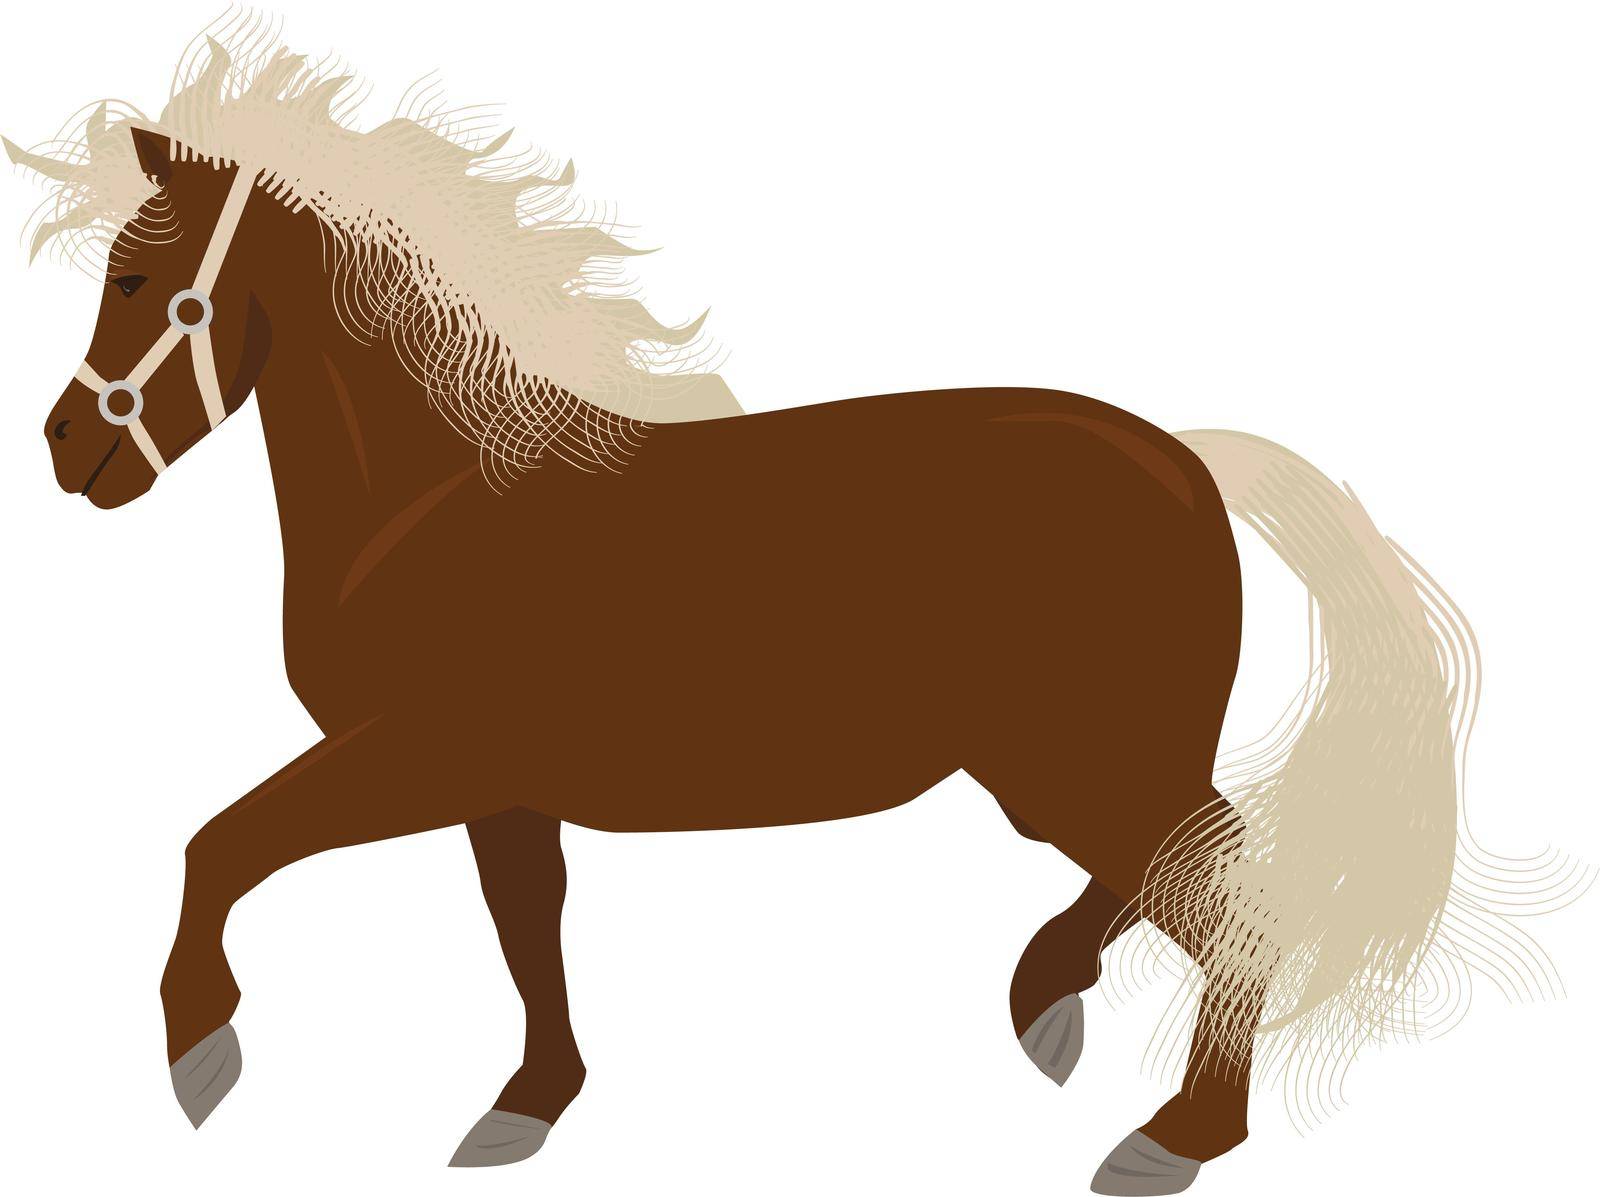 Mini horse or pony with long tail and mane in vector isolated on white background